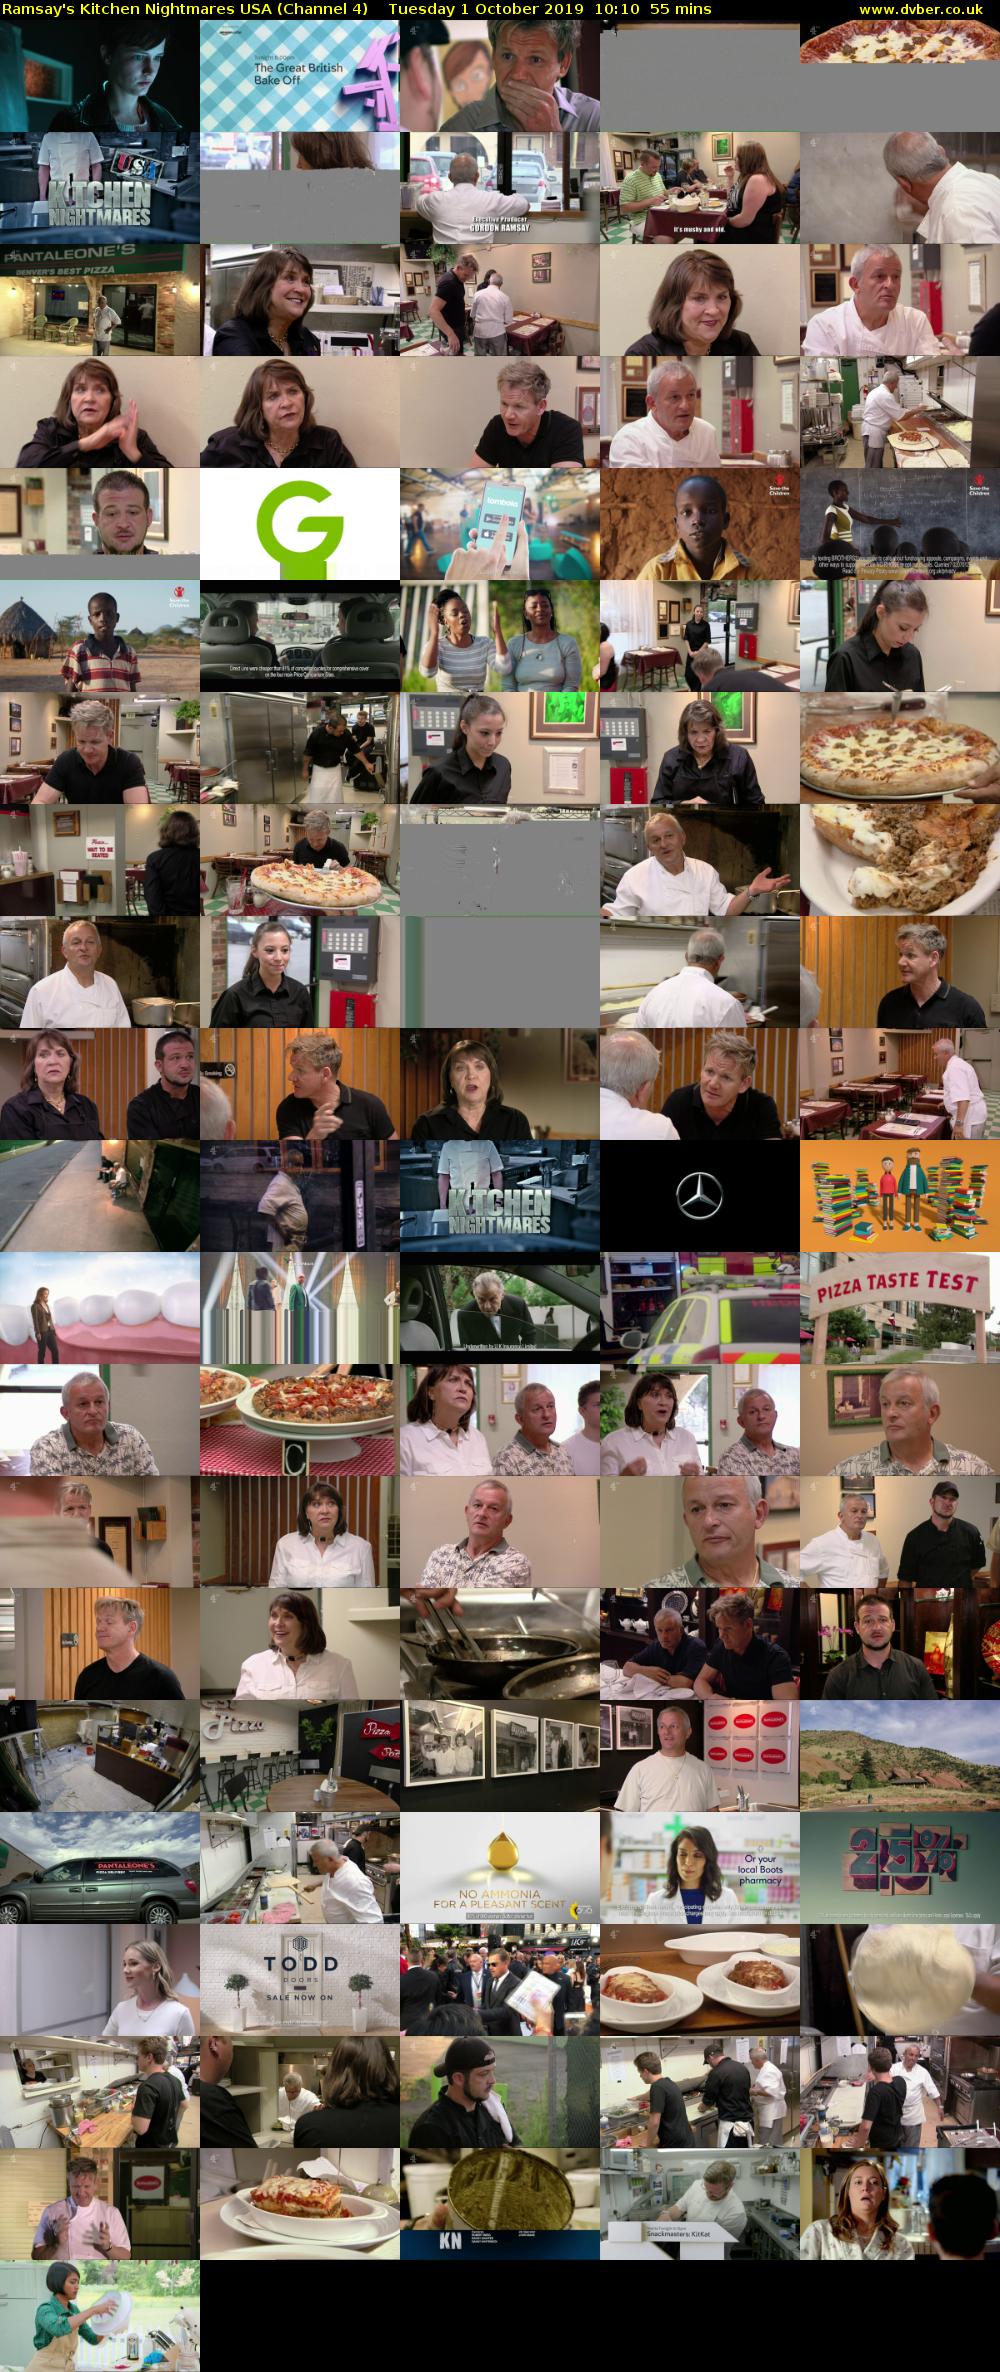 Ramsay's Kitchen Nightmares USA (Channel 4) Tuesday 1 October 2019 10:10 - 11:05